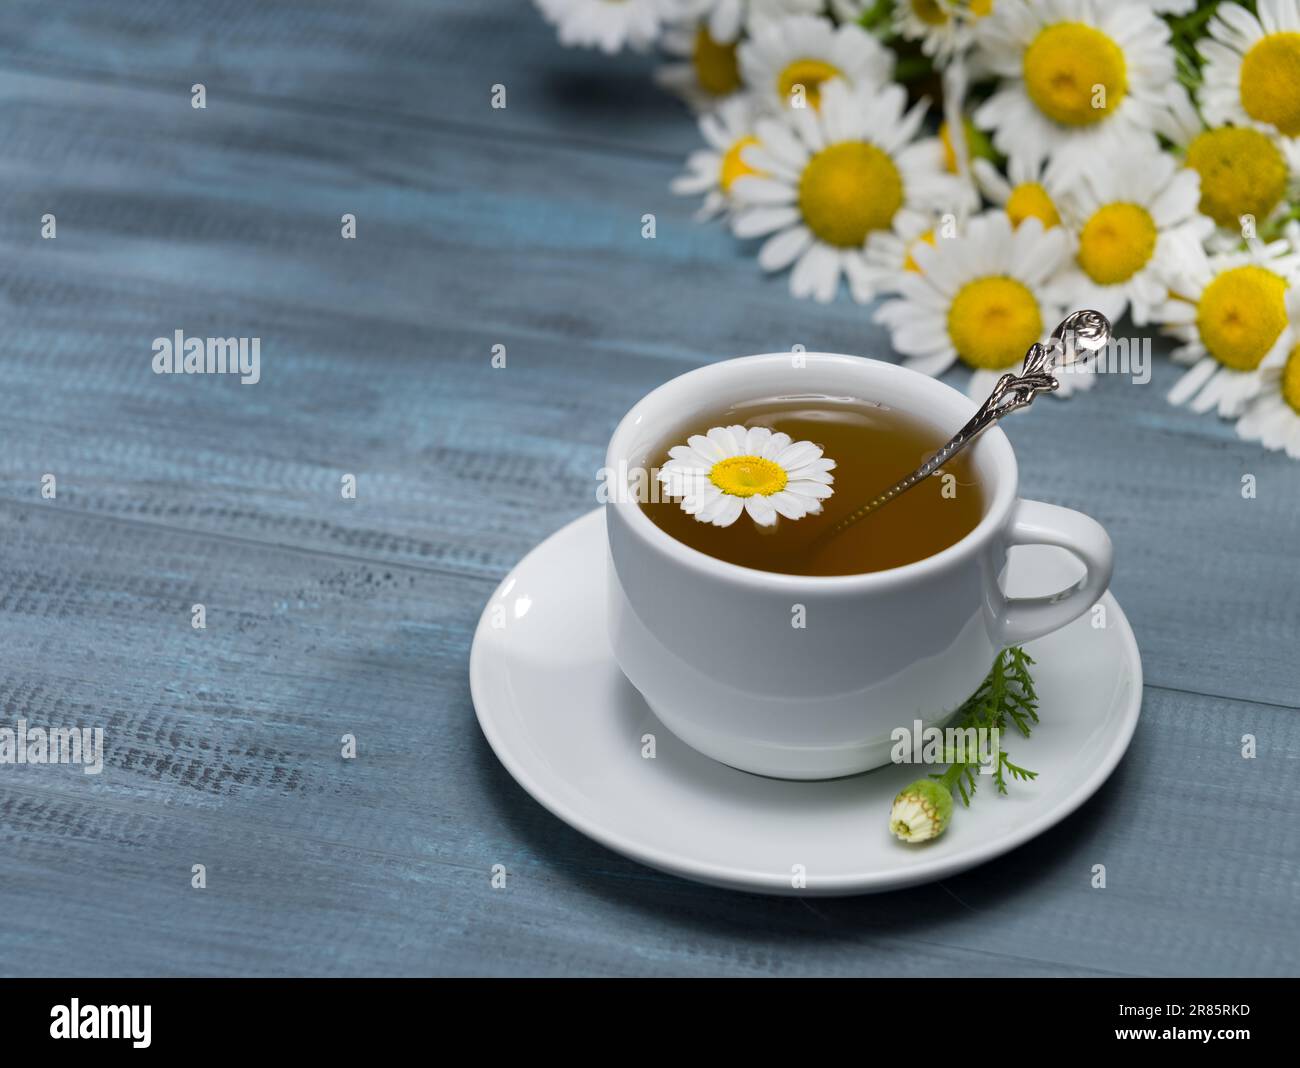 Cup of fresh chamomile tea on rustic table. Healthy teas concept Stock Photo